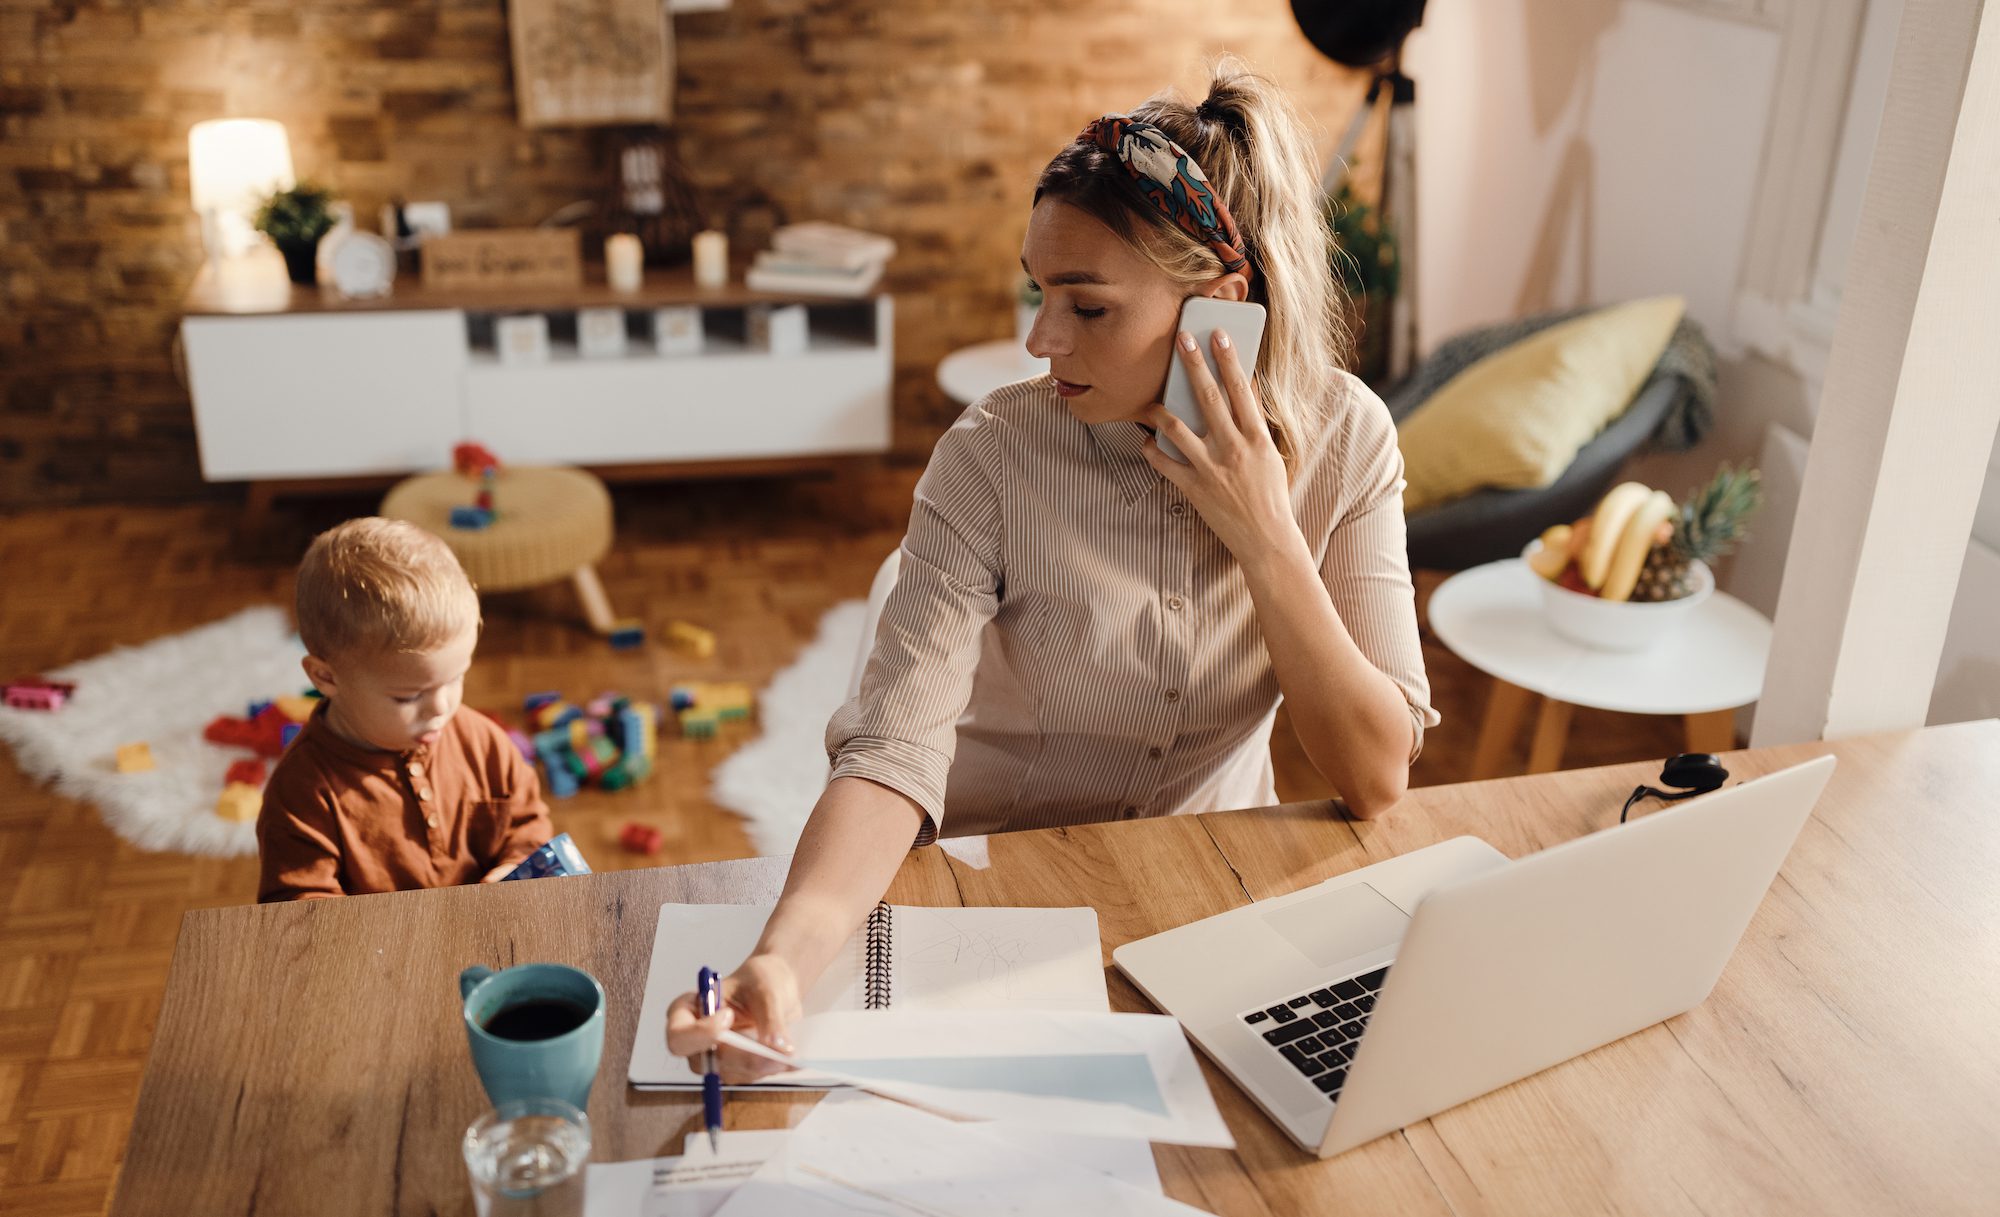 Female entrepreneur talking on the phone while being with her son at home.